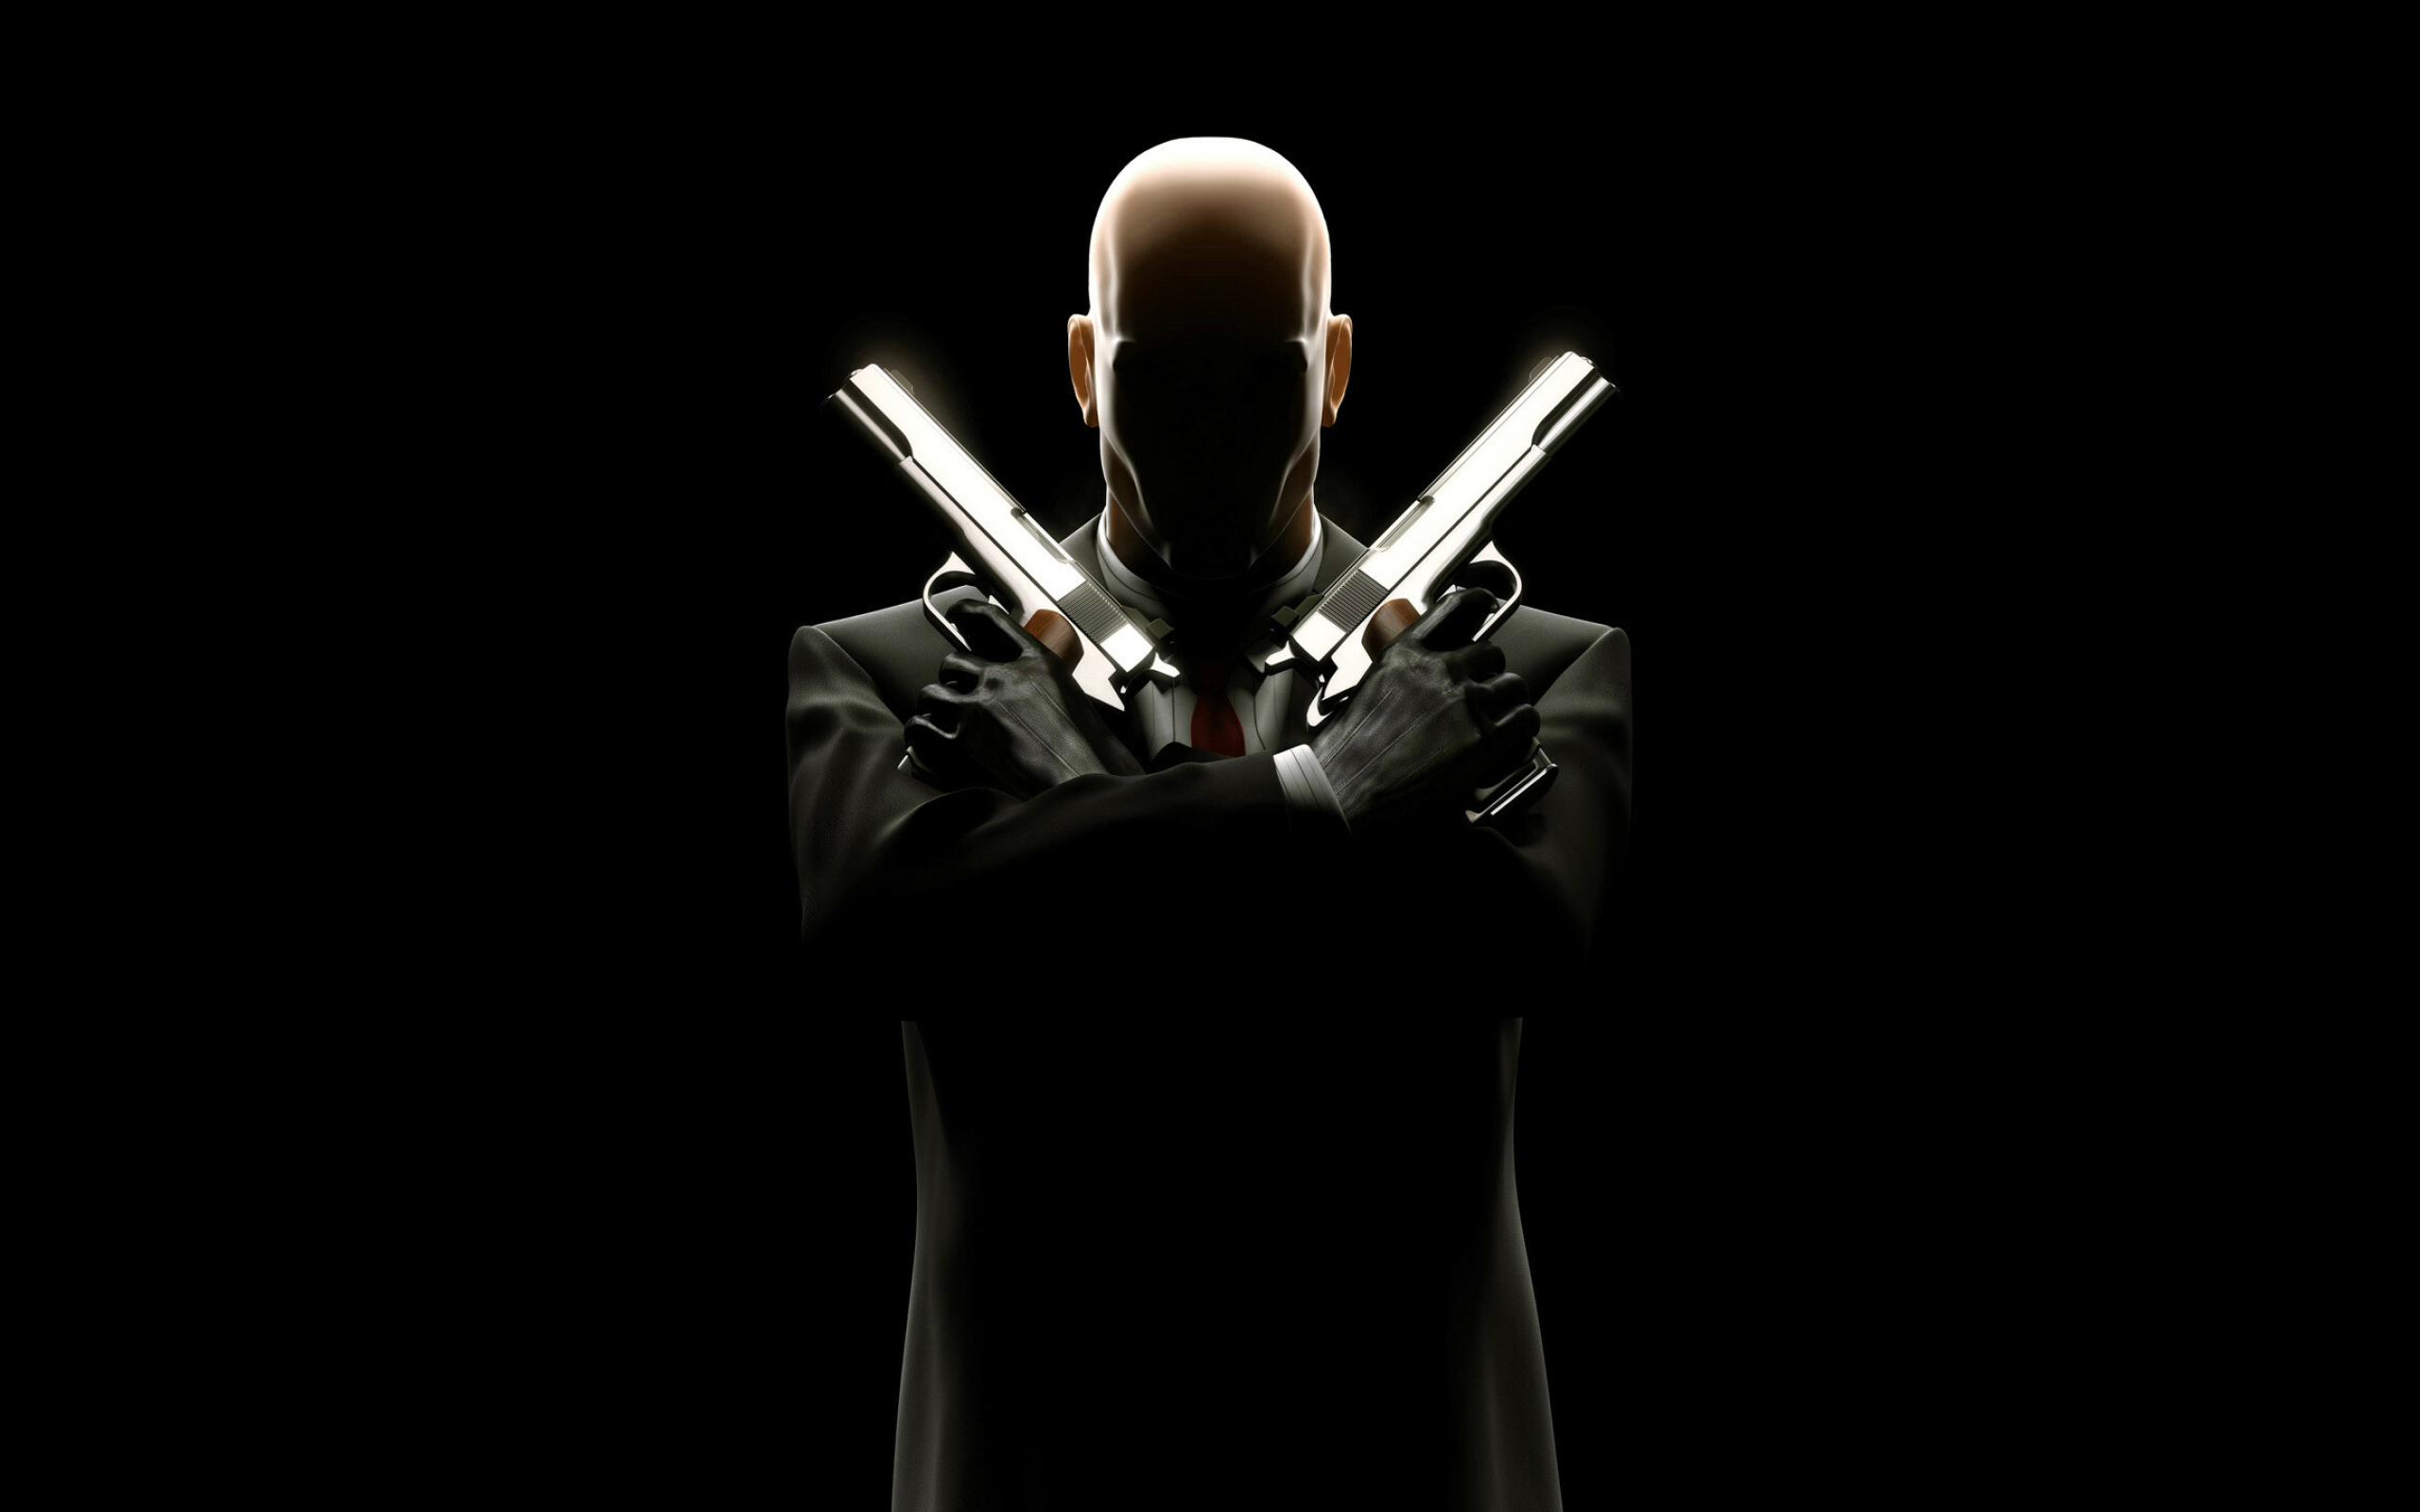 Hitman (Game): The series' main protagonist and playable character, Agent 47. 2560x1600 HD Wallpaper.